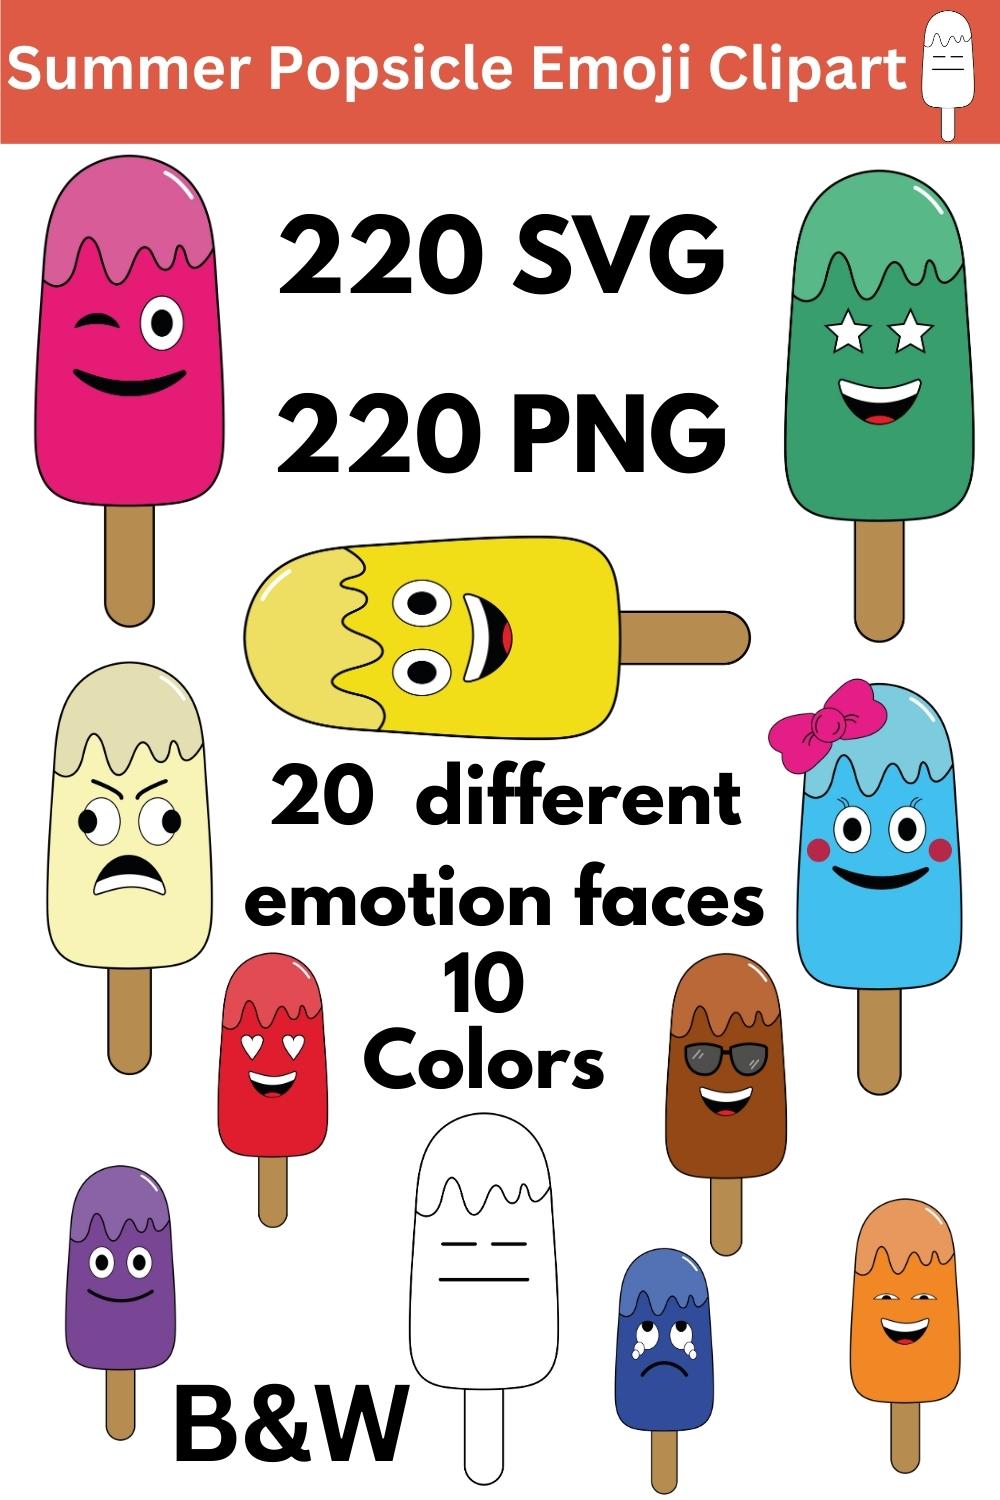 Popsicle Faces Emoji Emotions Clipart - 220 SVG and PNG only $7 pinterest preview image.